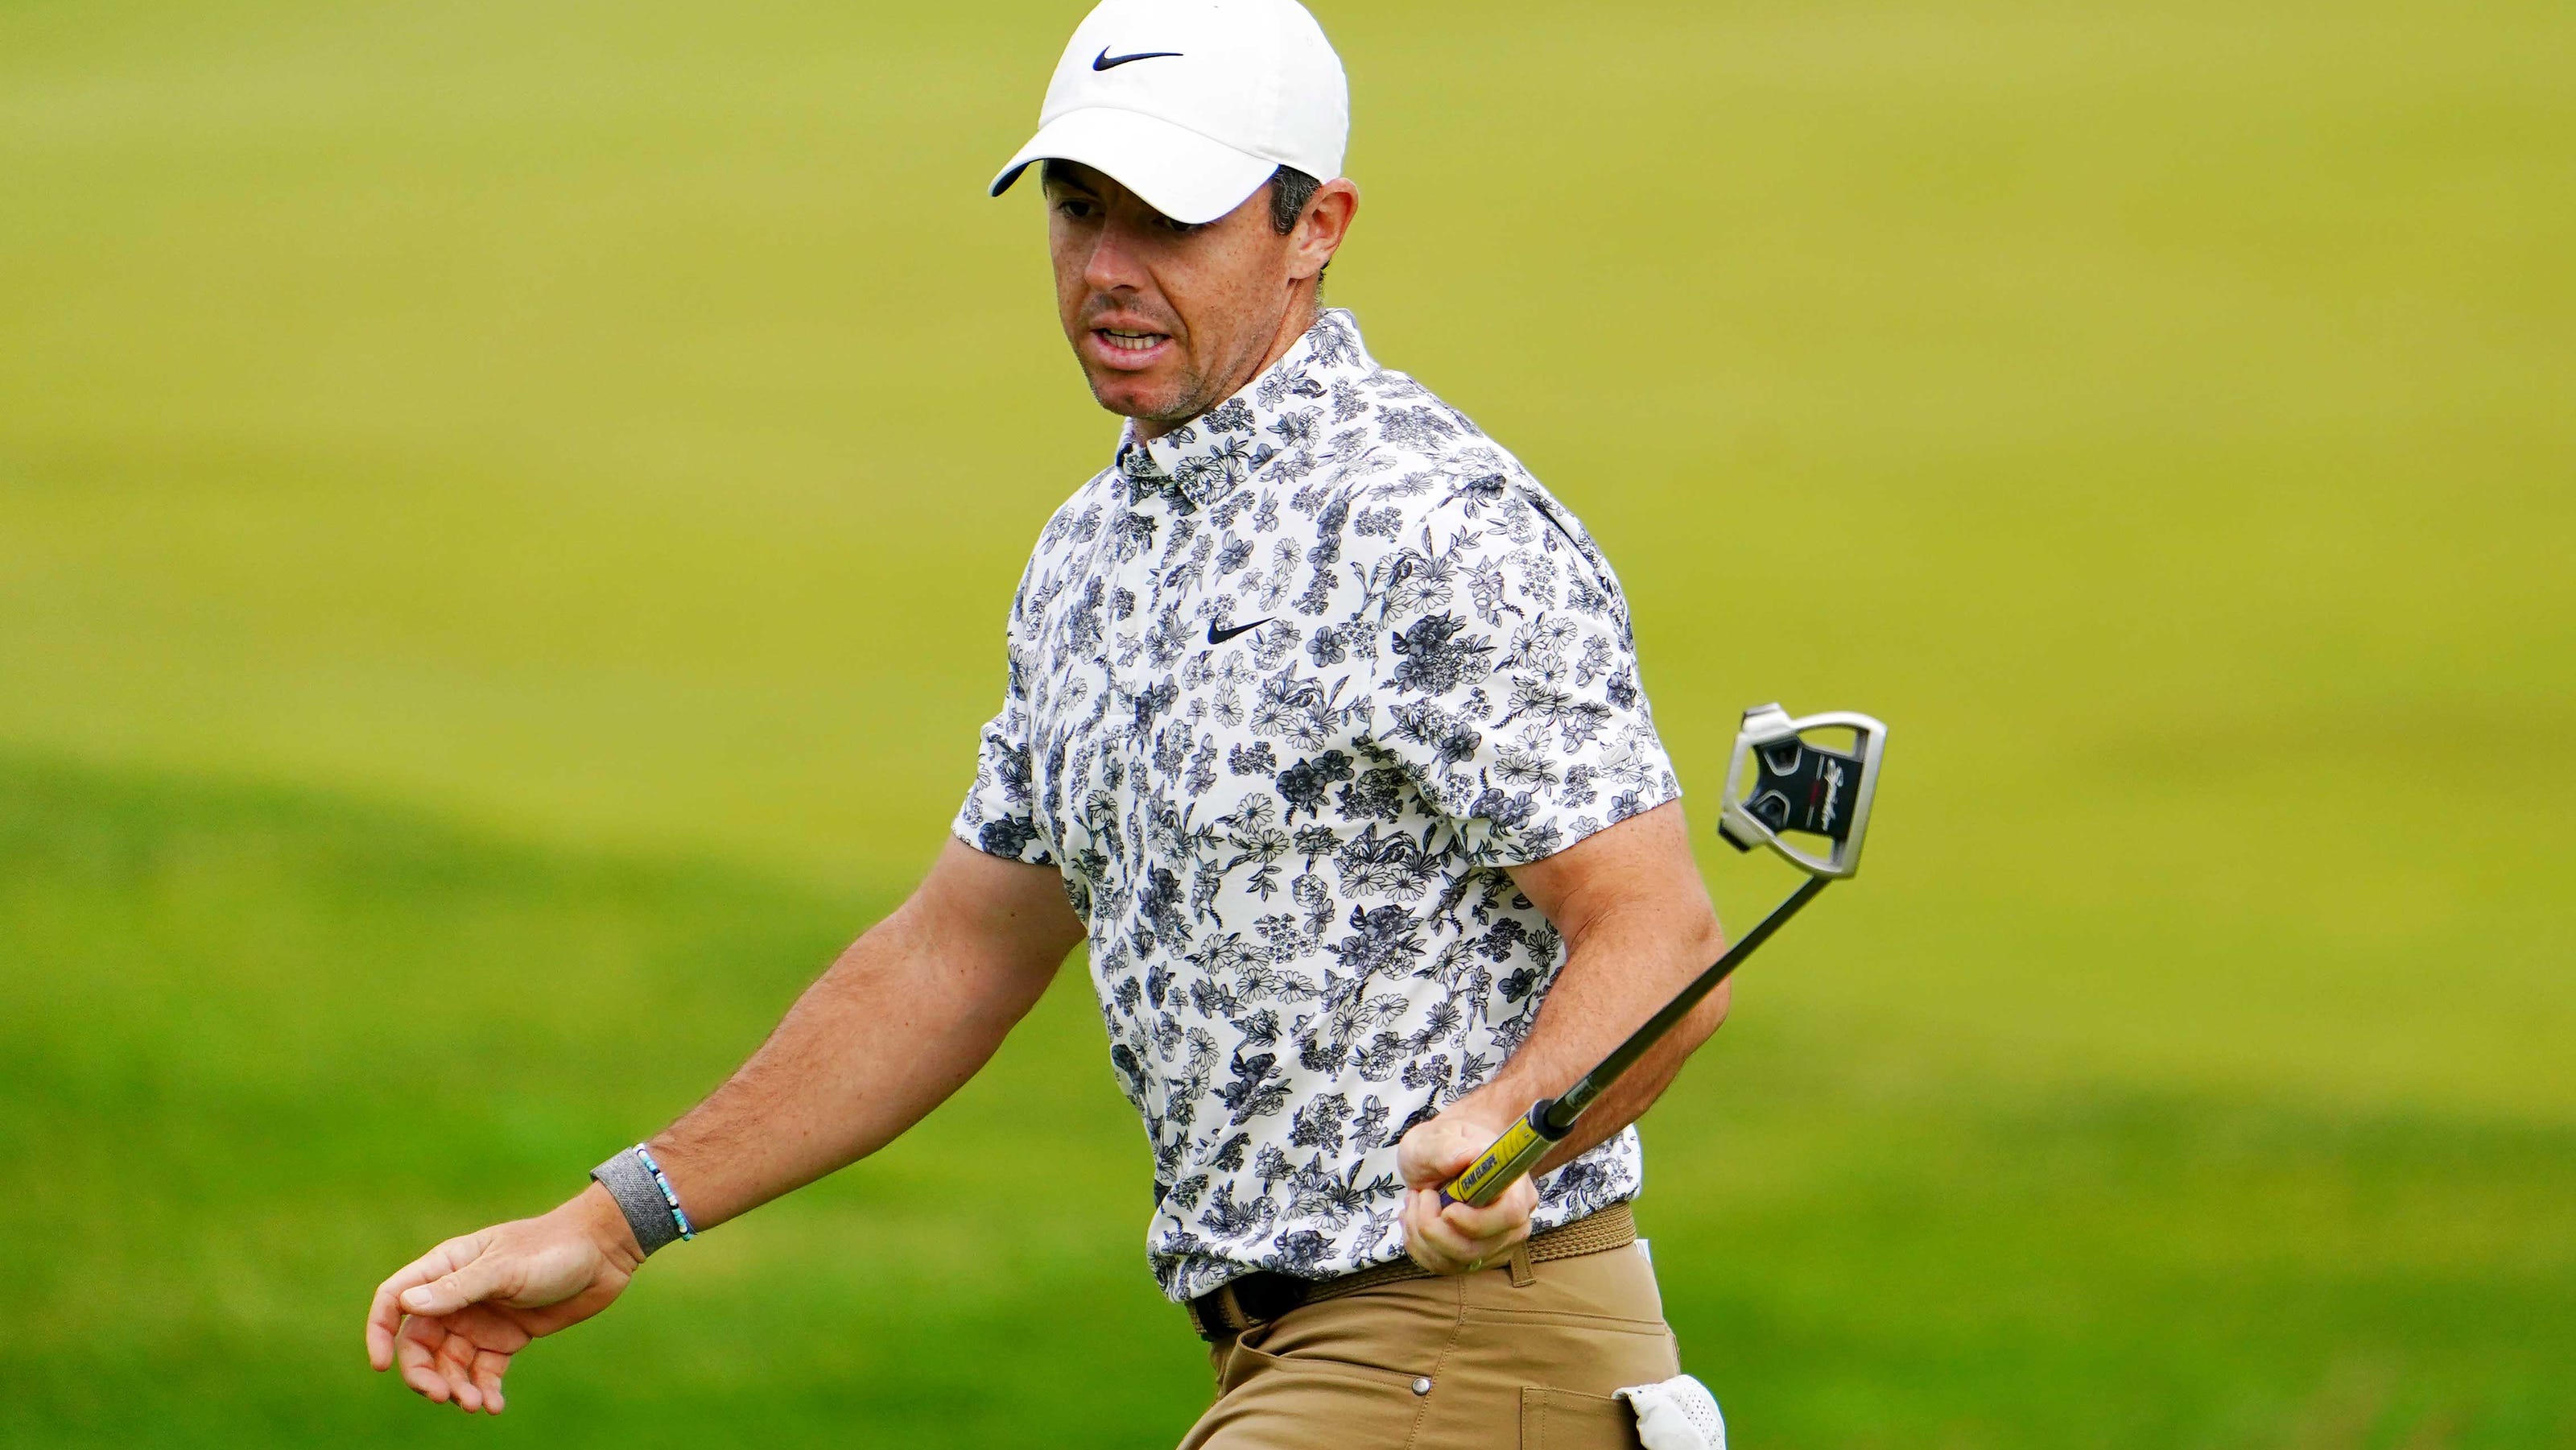 US Open Rory McIlroy makes amazing save after outburst on hole No. 5